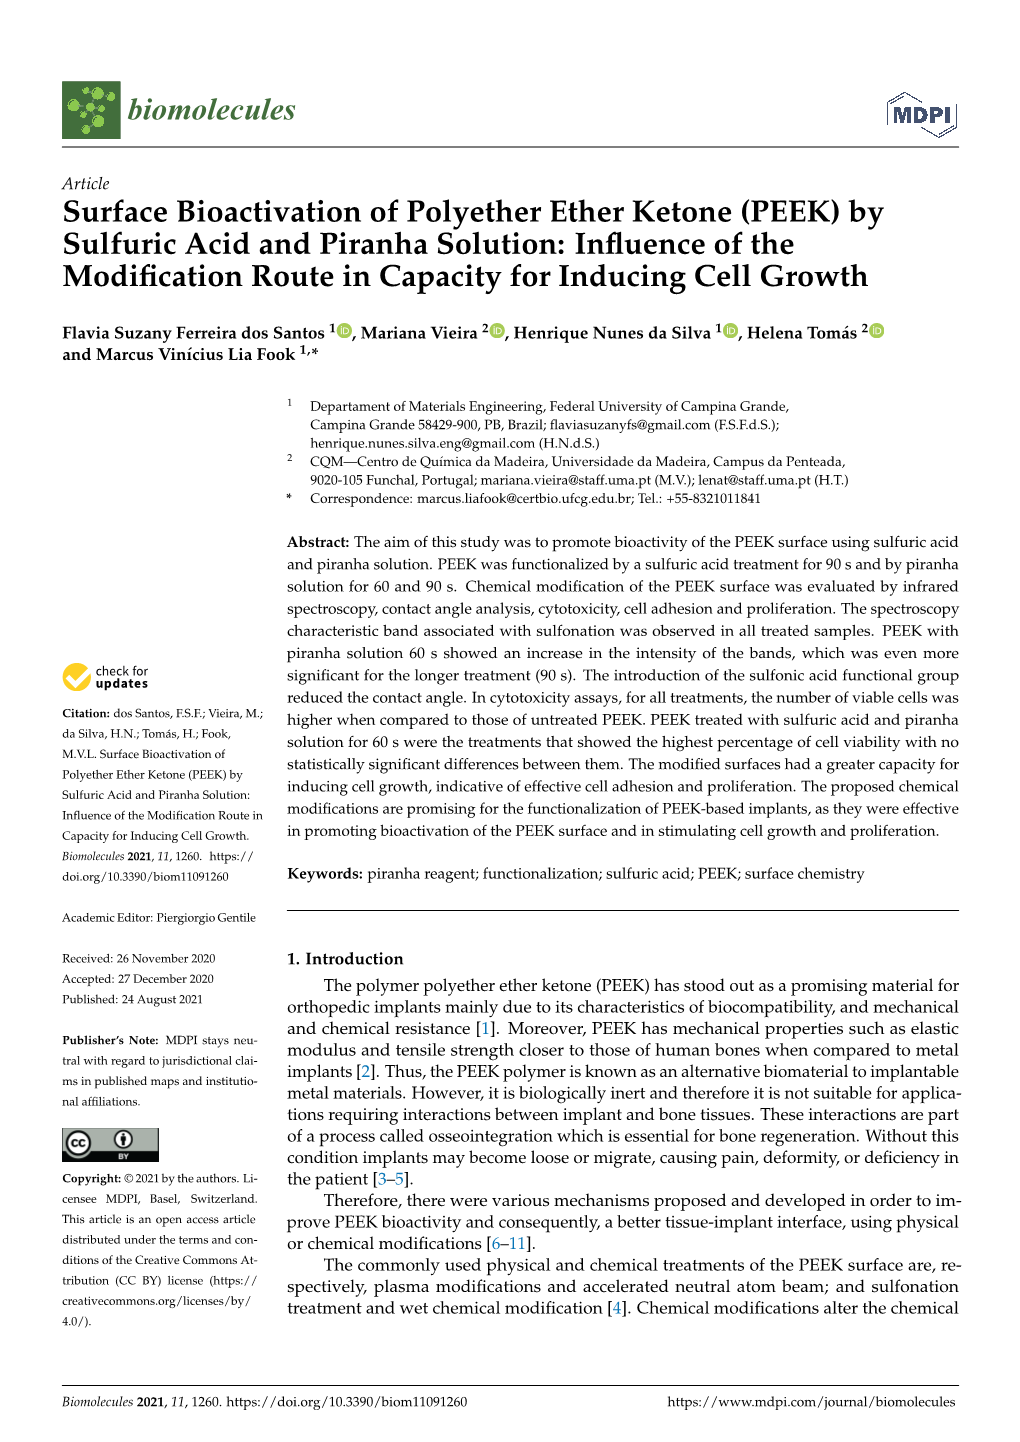 (PEEK) by Sulfuric Acid and Piranha Solution: Inﬂuence of the Modiﬁcation Route in Capacity for Inducing Cell Growth